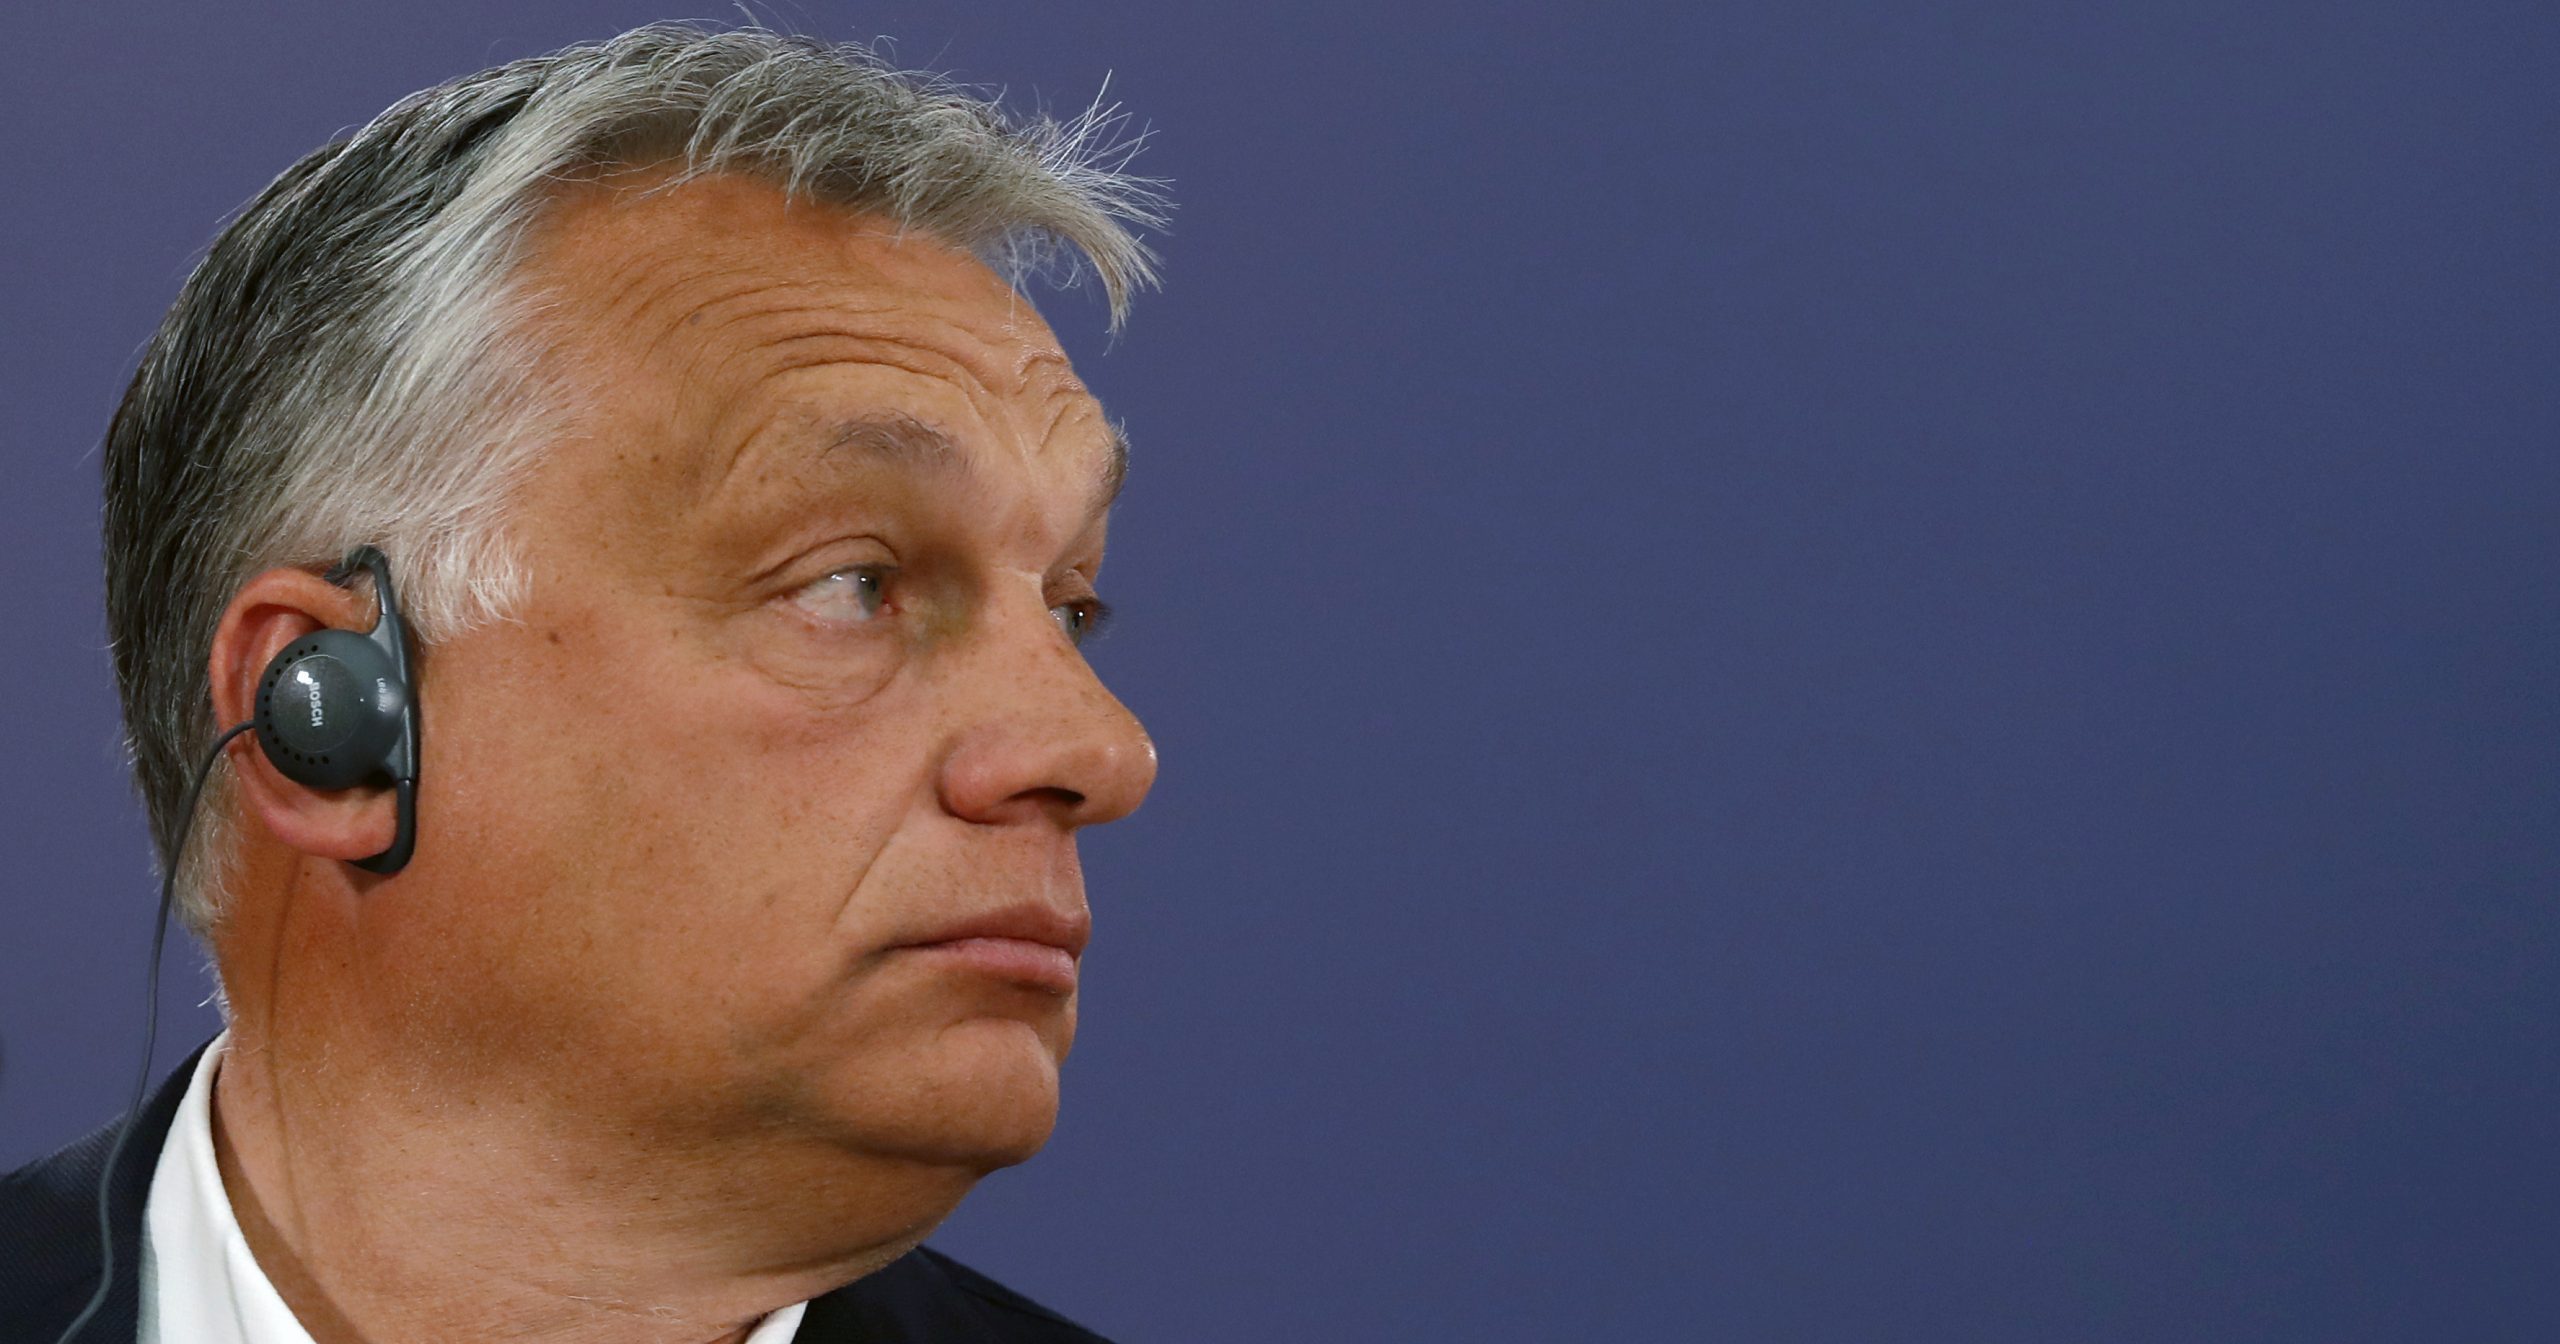 Hungarian Prime Minister Viktor Orban listens to a question during a news conference after a meeting with Serbian President Aleksandar Vucic in Belgrade, Serbia, on May 15, 2020.